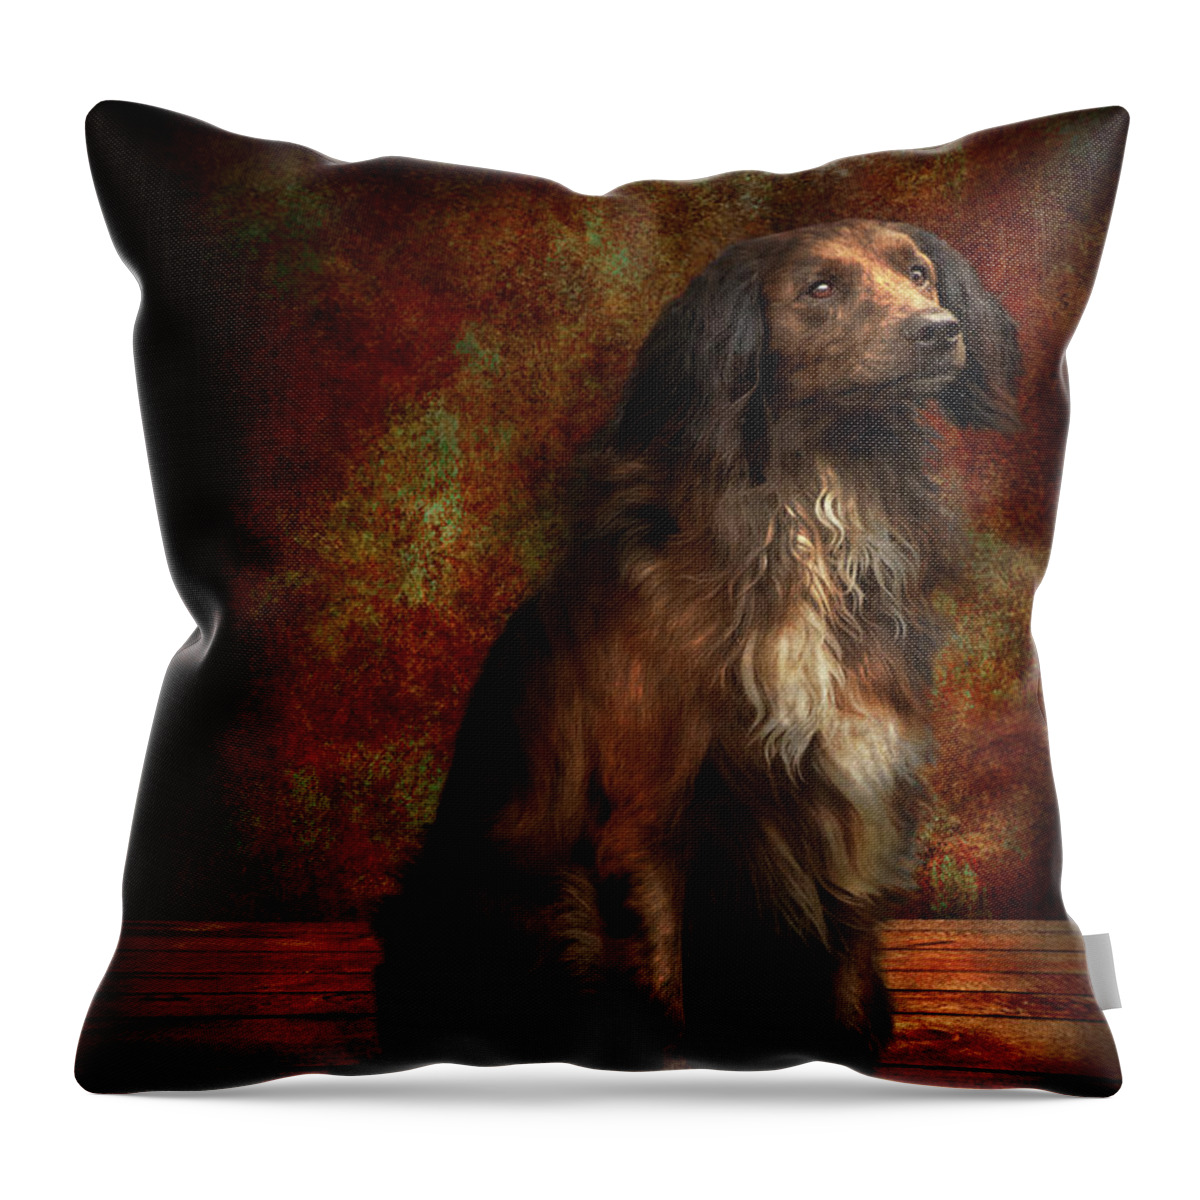 Dog Throw Pillow featuring the photograph Animal - Dog - Cocker Spaniel - Those dreamy eyes by Mike Savad